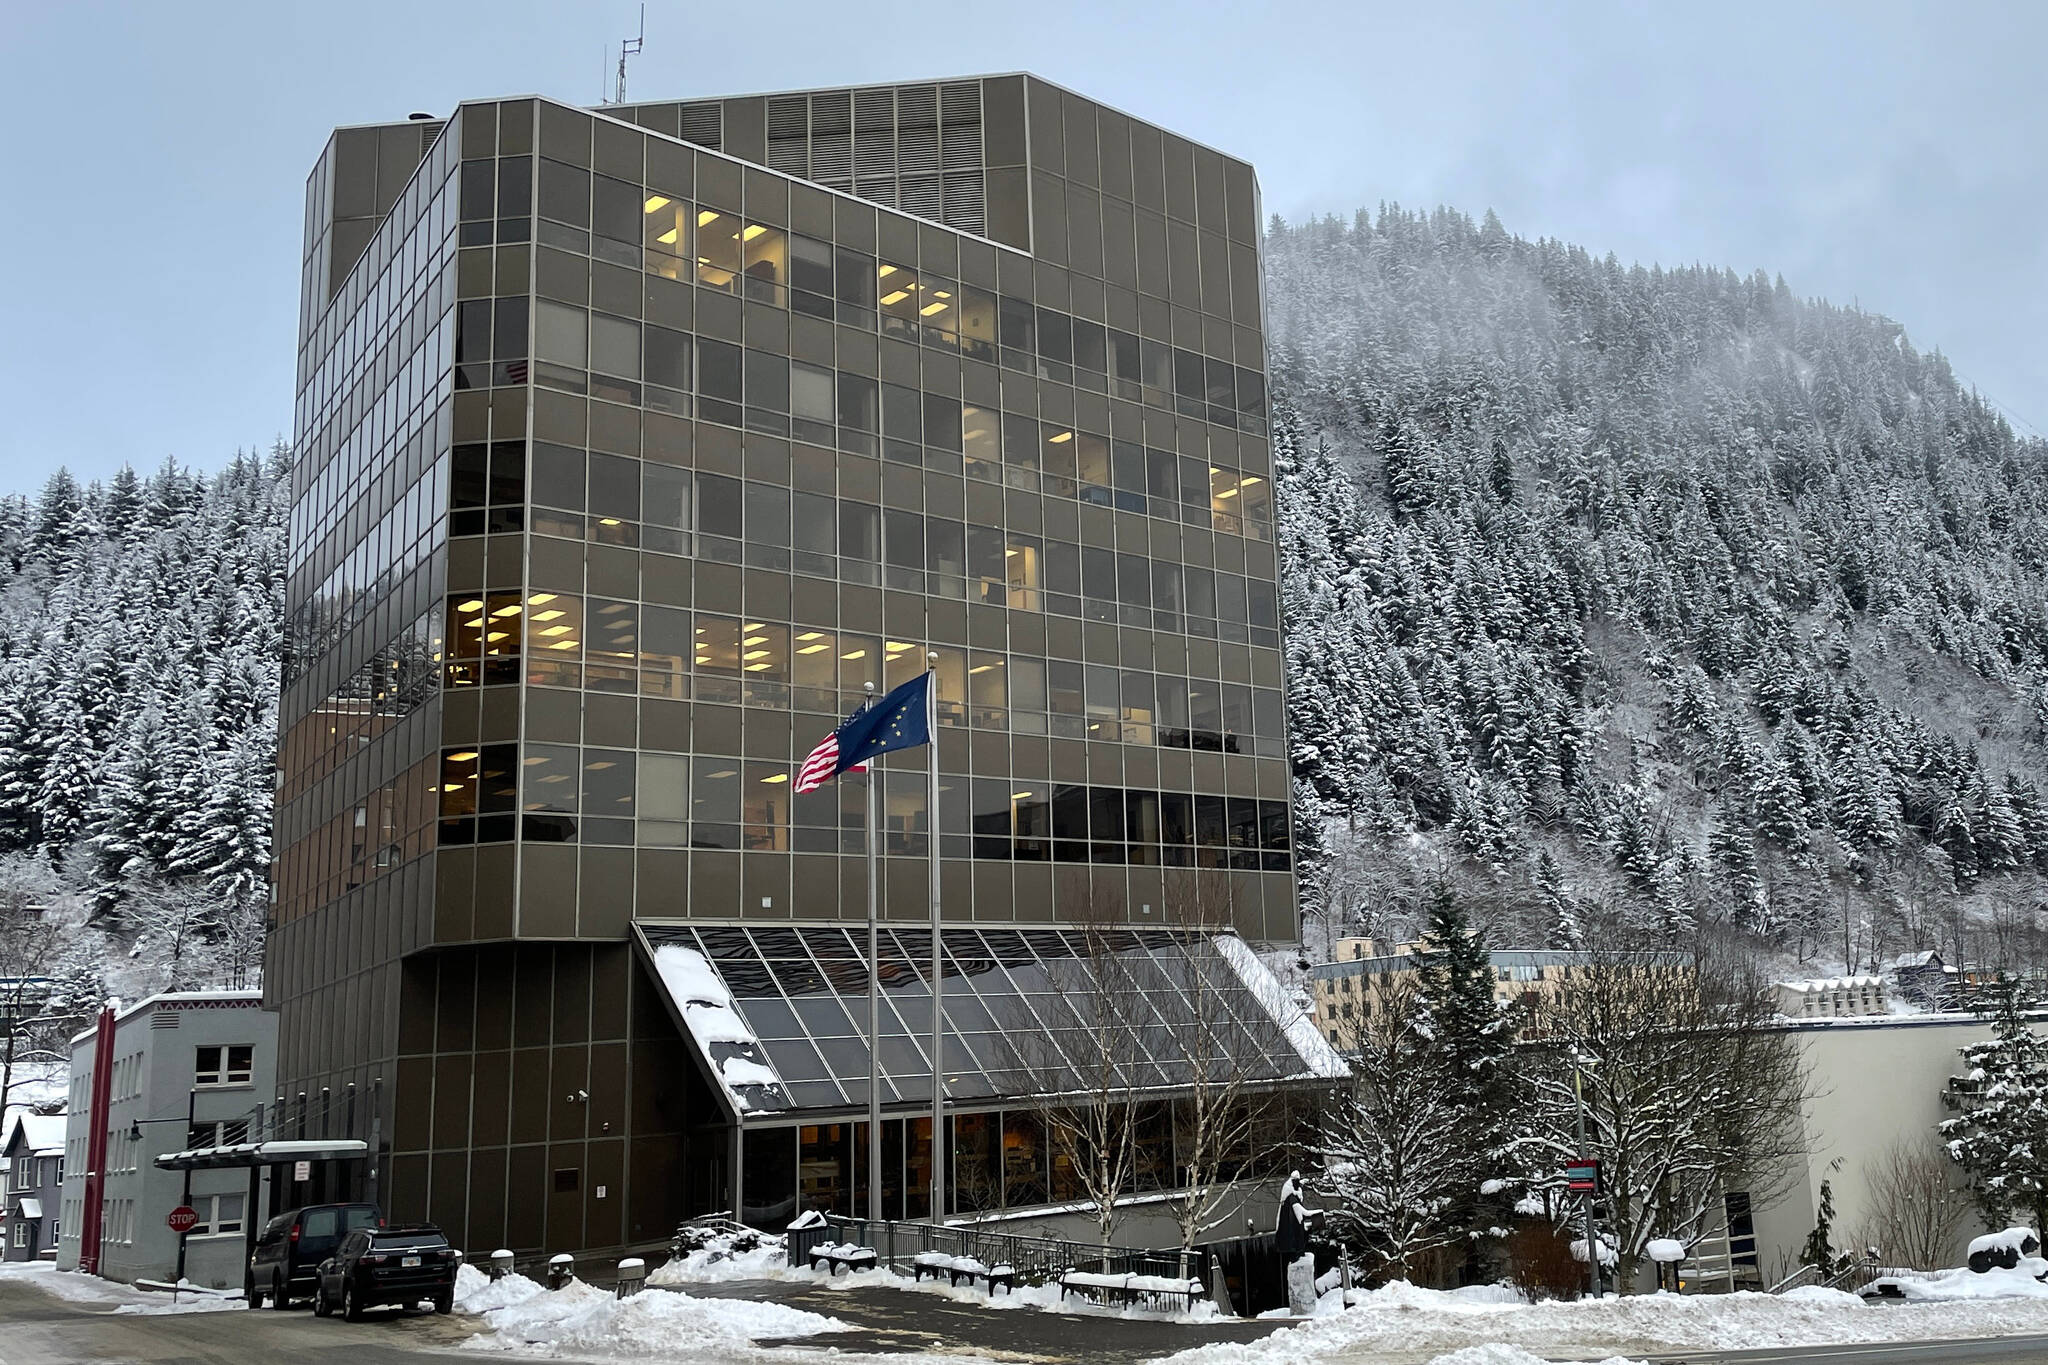 The jury in a trial for a 2018 killing is currently sequestered as they deliberate. (Michael S. Lockett / Juneau Empire File)